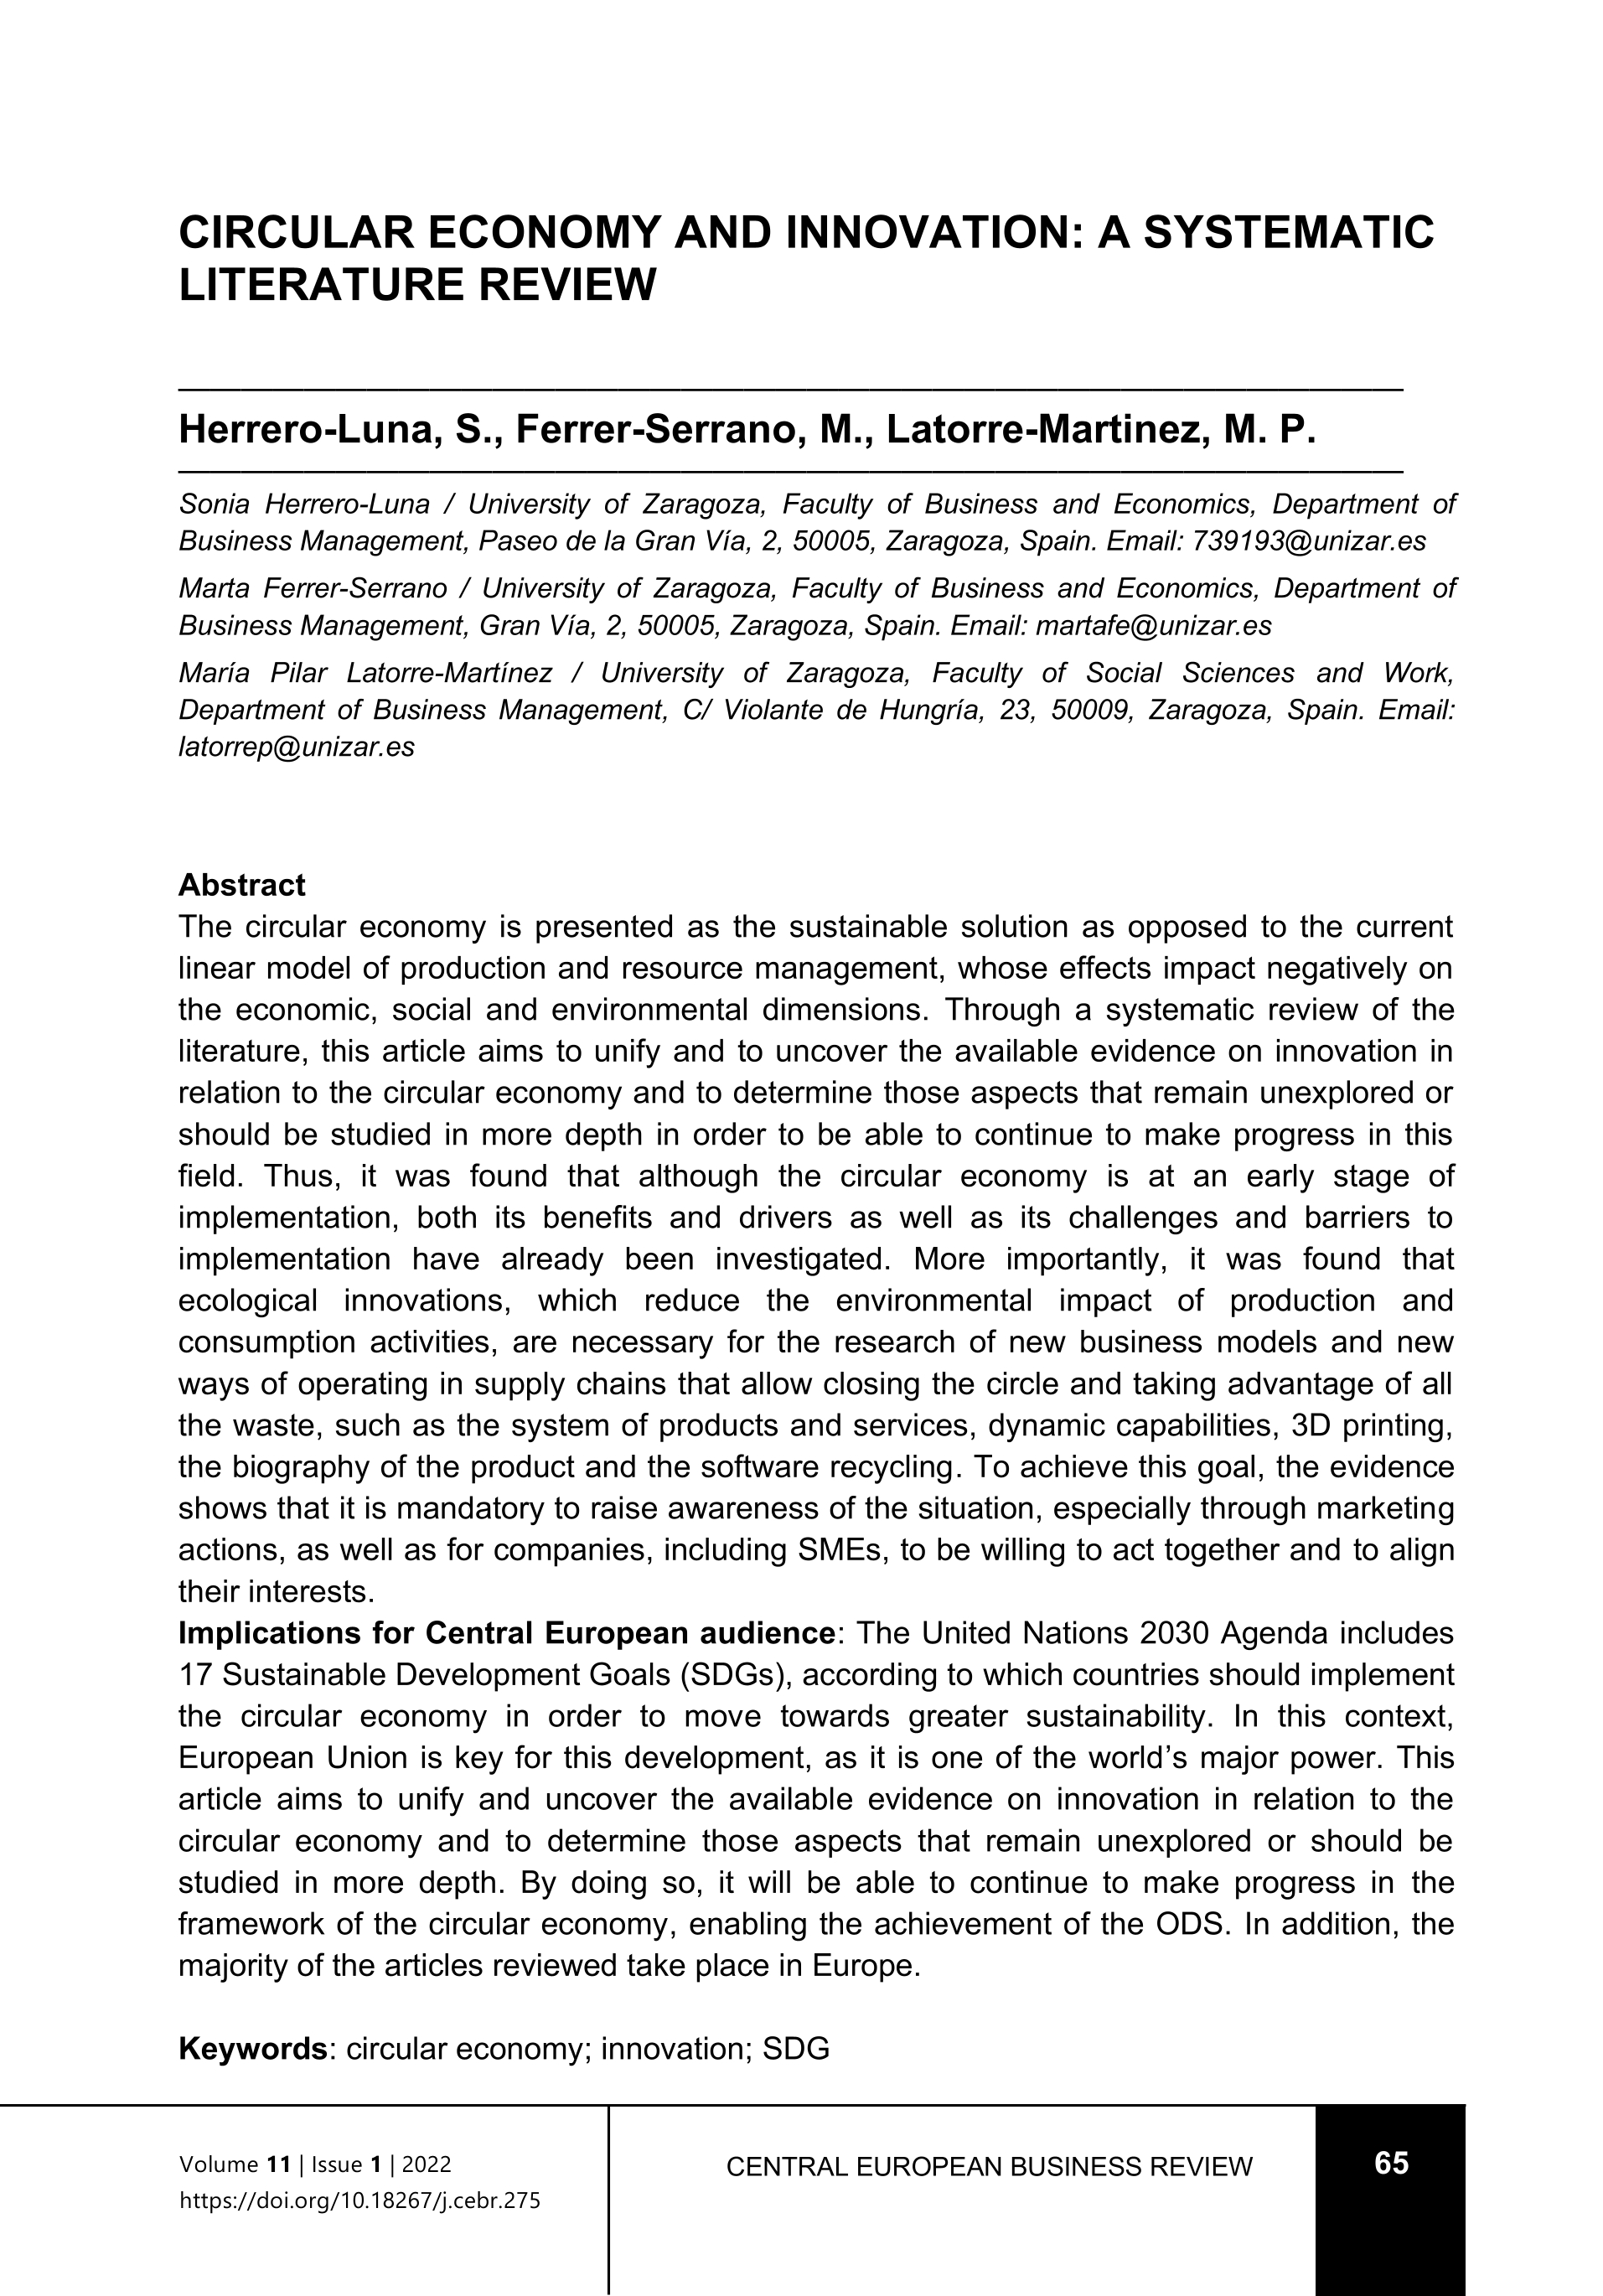 Circular Economy and Innovation: a Systematic Literature Review